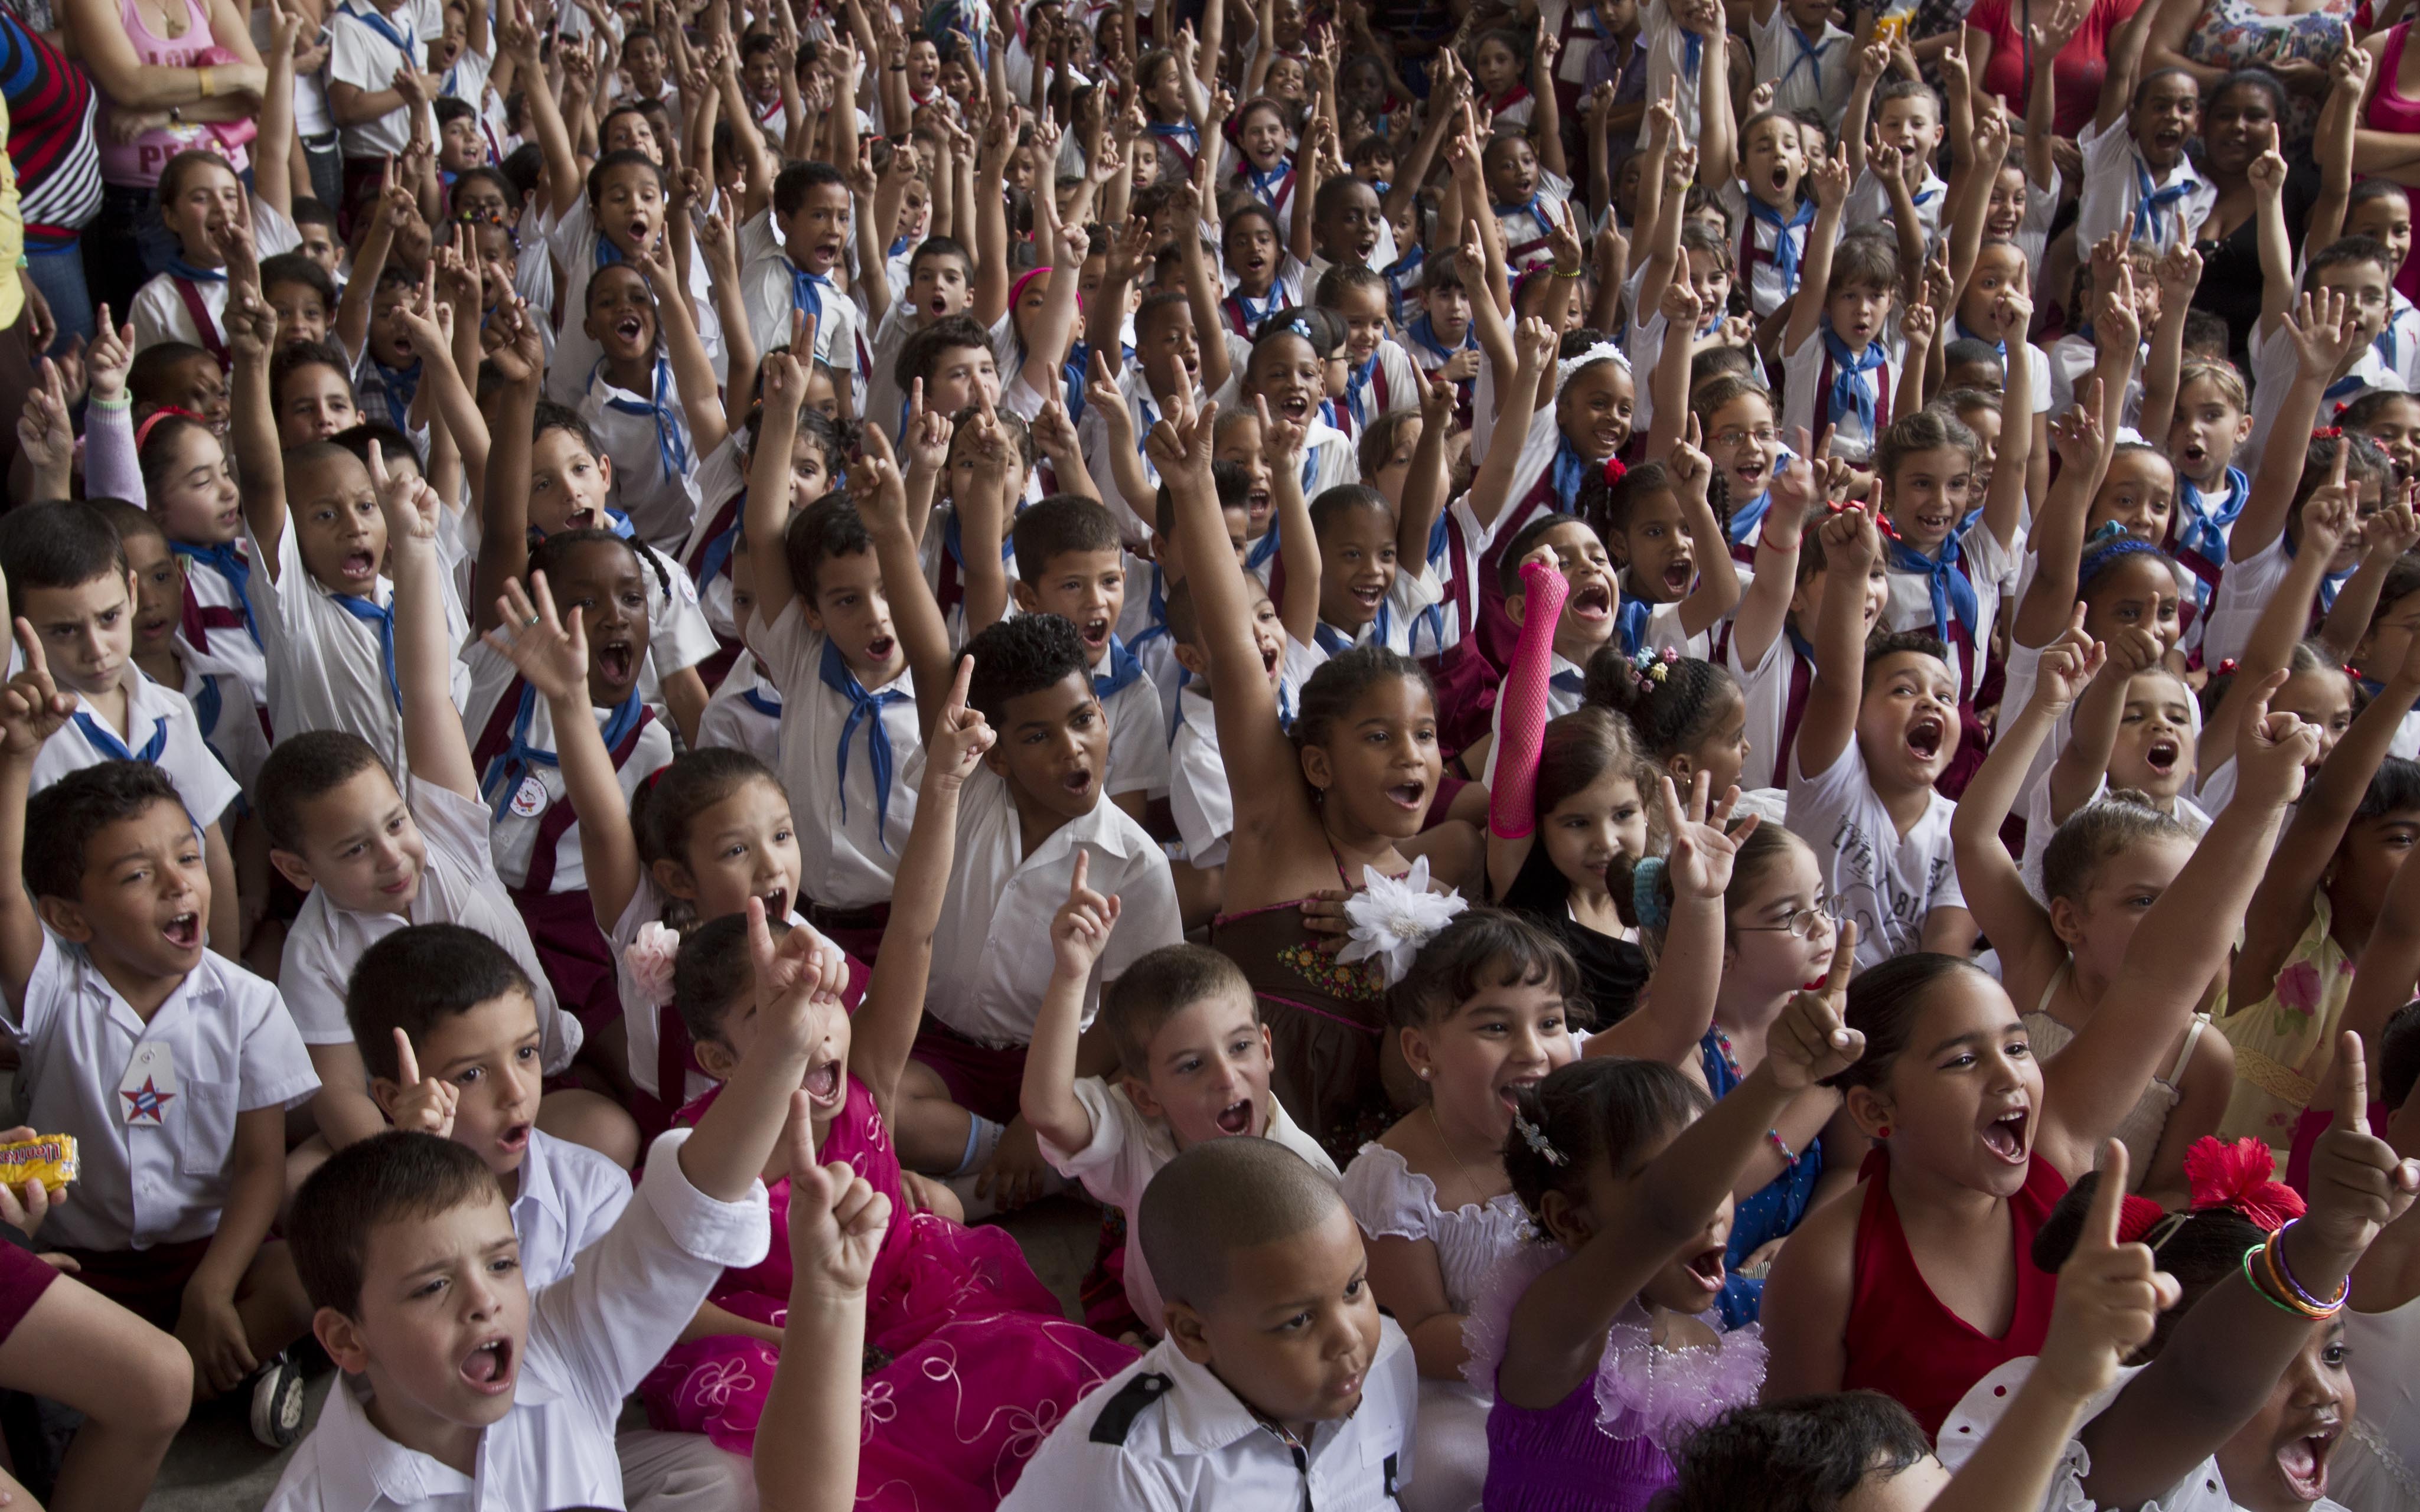 Young students cheer during a celebration to mark the anniversaries of the Organization of Cuban Pioneers and of the Union of Communist Youth at the Angela Landa elementary school in Old Havana, Cuba, Friday, April 4, 2014. Cuban schoolchildren are referred to as "pioneers," and the organization was founded in 1961 to encourage the values of education and social responsibility among children and adolescents. (AP Photo/Franklin Reyes) ORG XMIT: XFR105